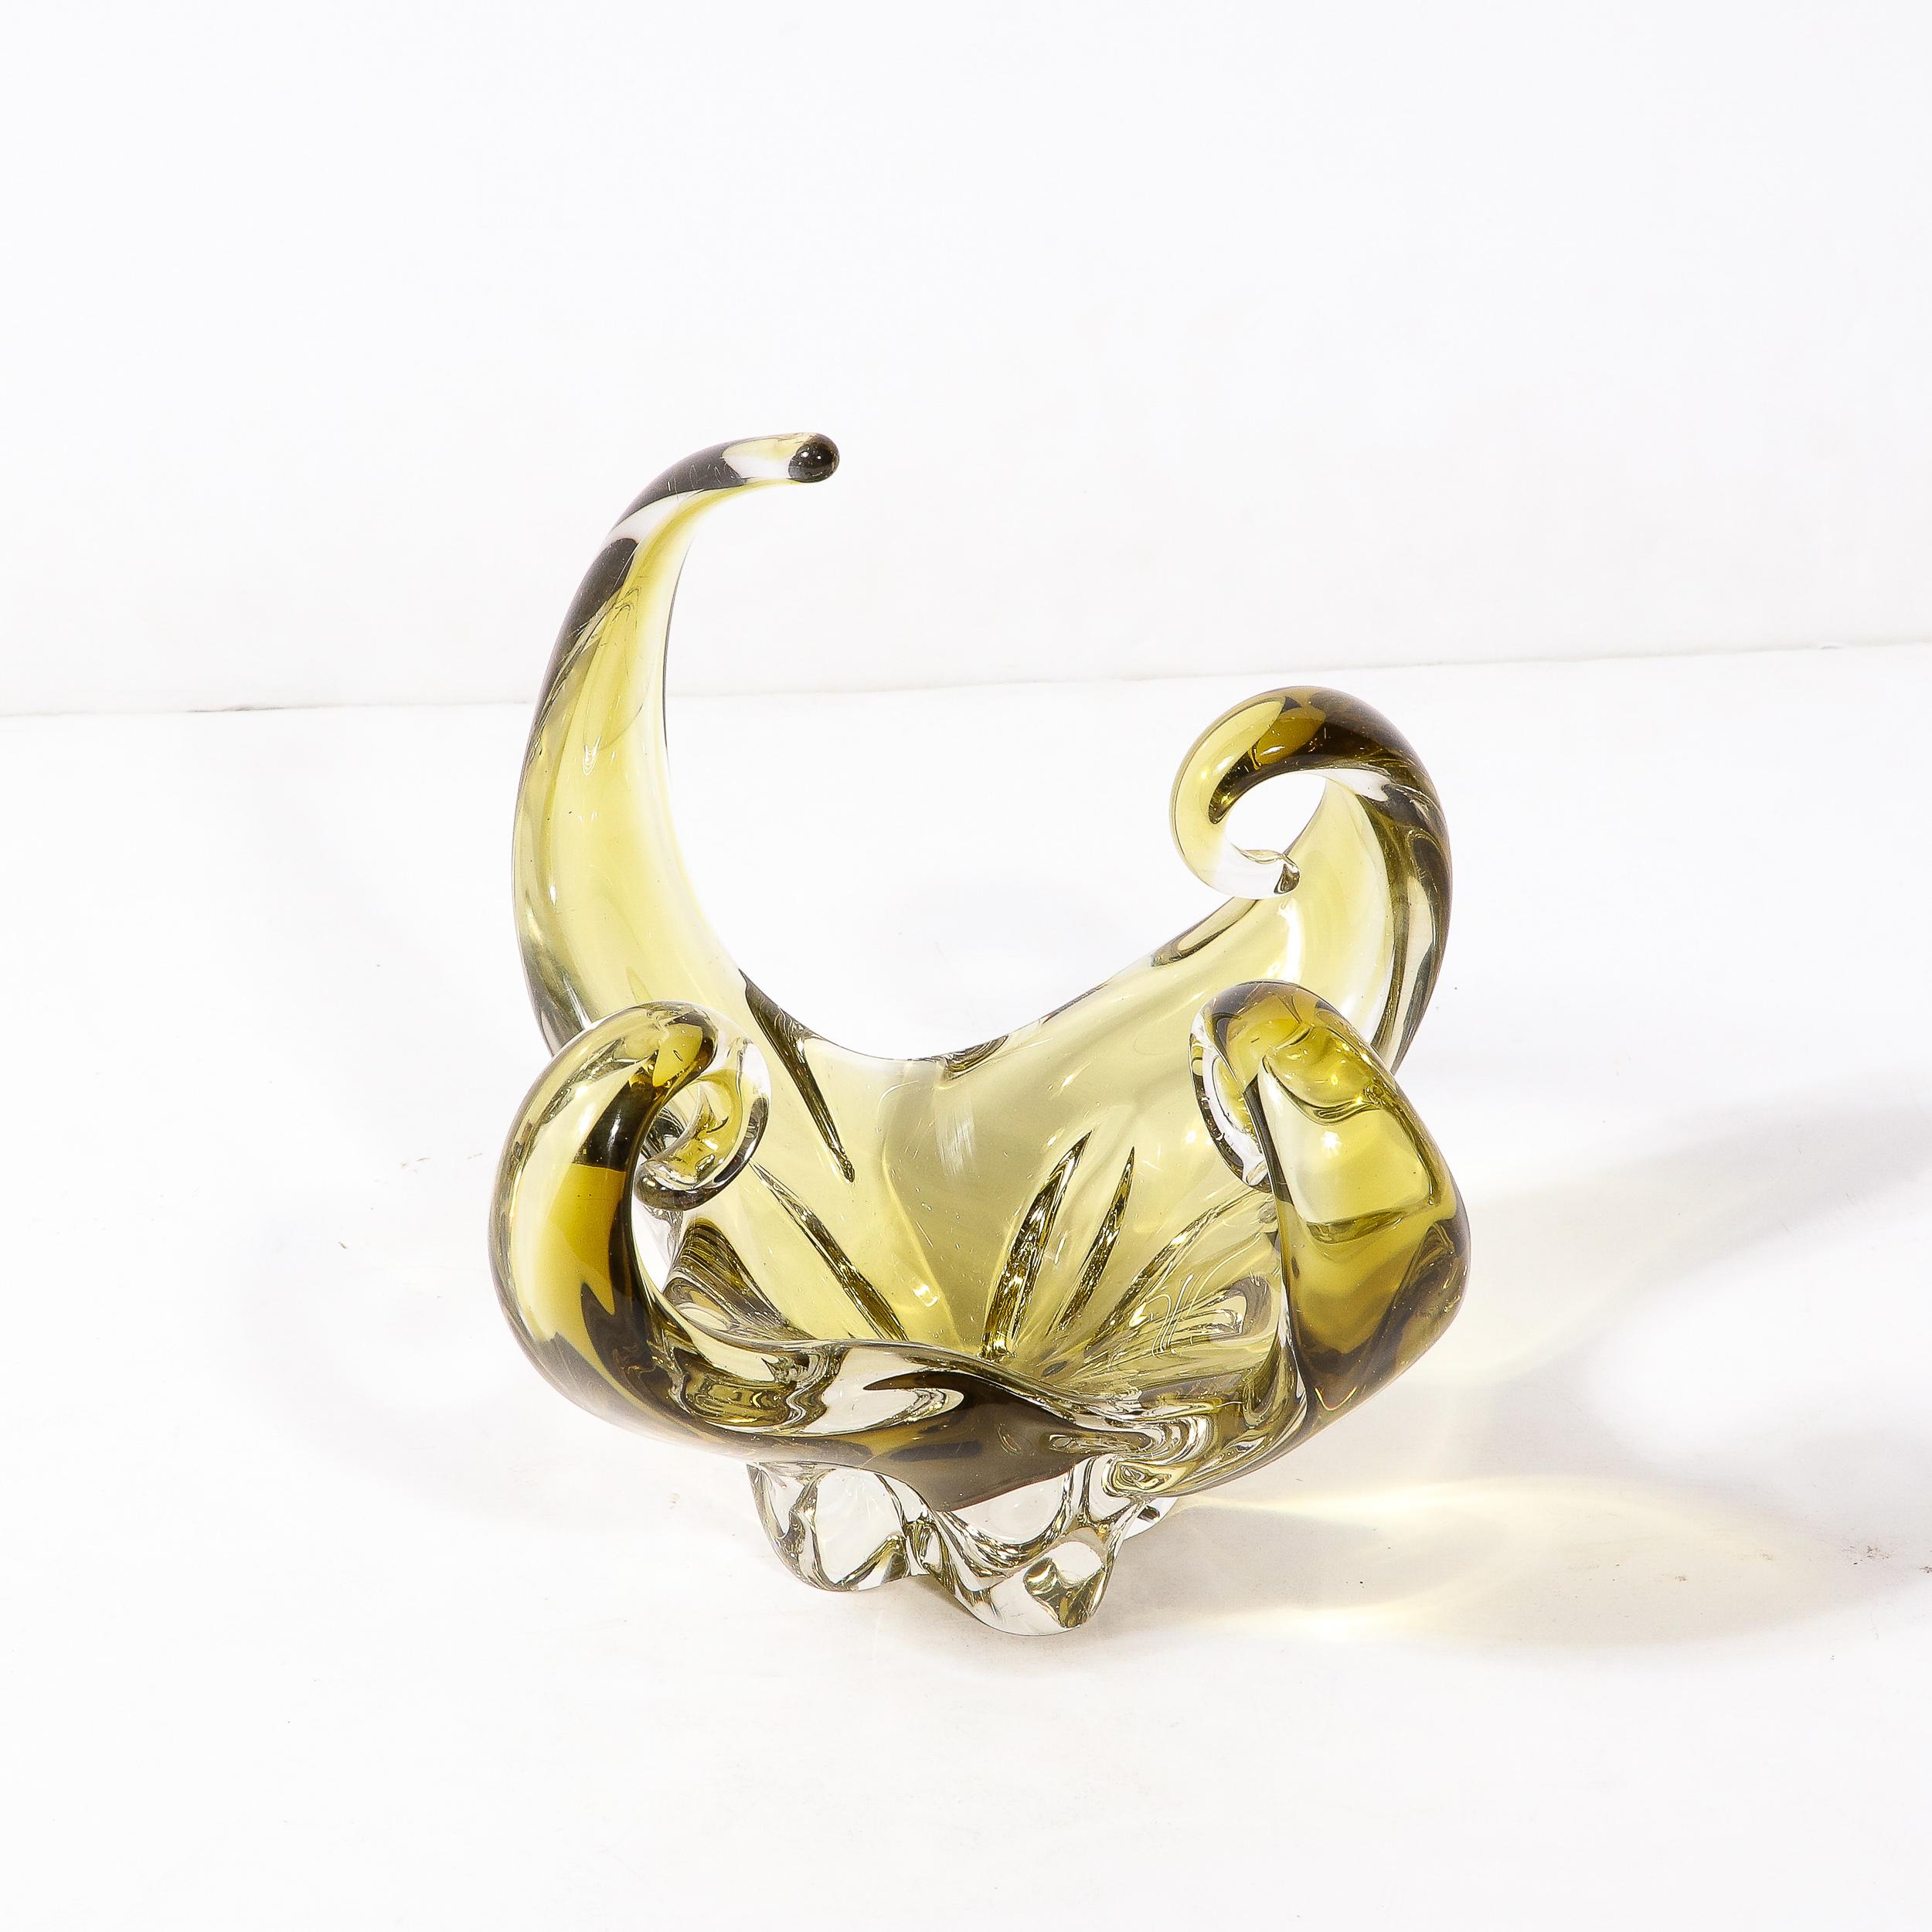 -This beautiful Mid-Century modernist Murano glass centerpiece is rendered in a lovely smoked citrine  and originates from Italy, Circa. 1960. Featuring a series of elongated arms coiling inwards, one expands elegantly creating dynamism and intrigue